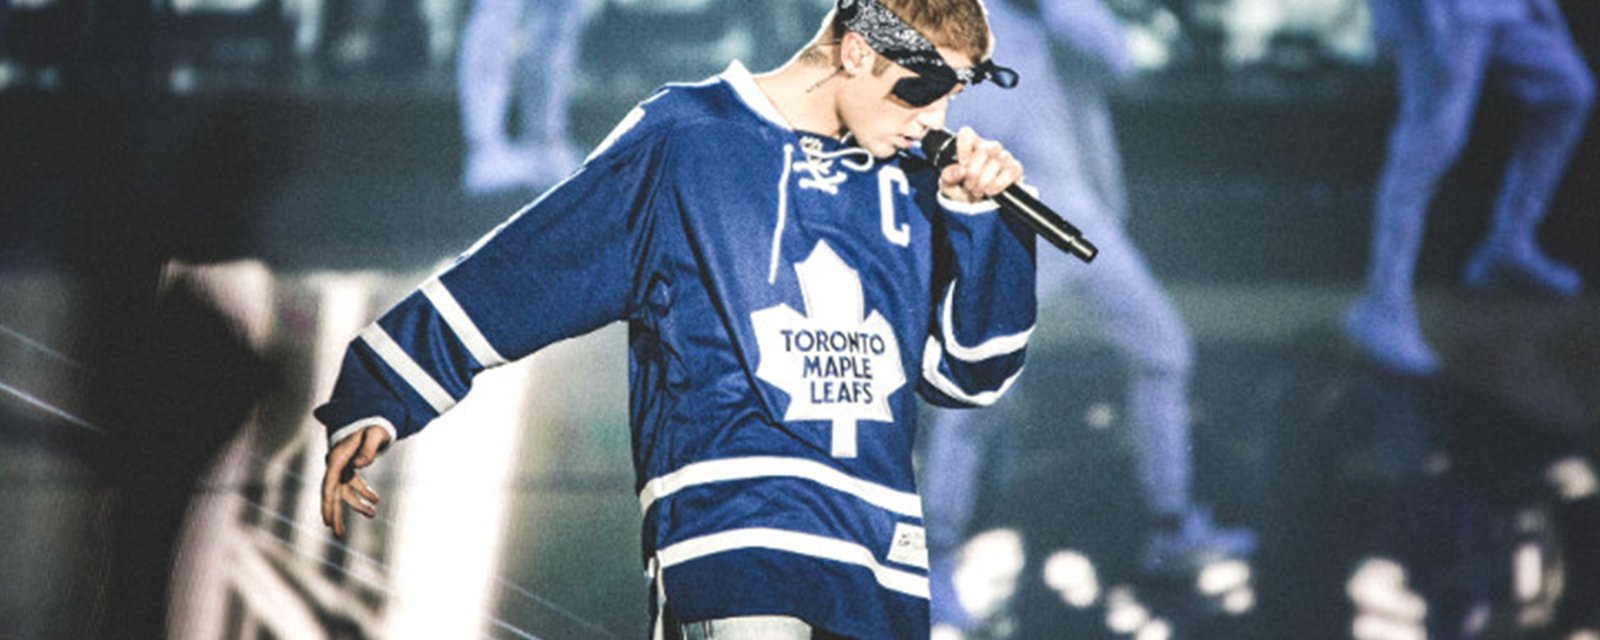 Proud Leafs fan Justin Bieber challenges Tom Cruise to a scrap